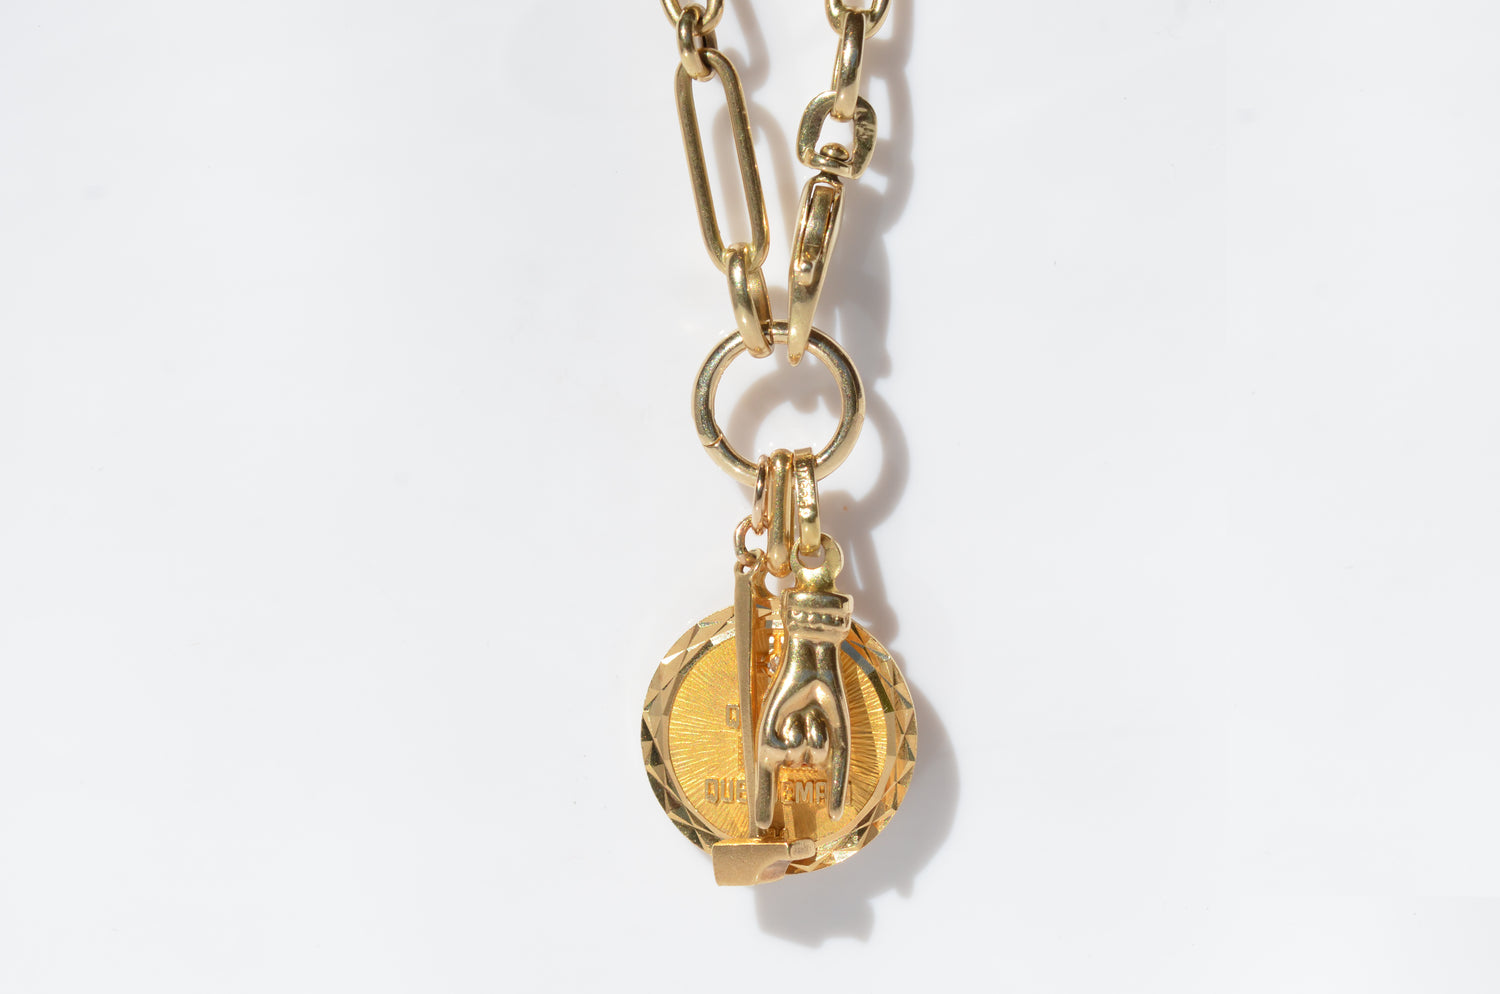 a contemporary chain and charm ring hold a trio of vintage pendants: an Egyptian hammer, a French love token, and an Italian mano cornuto